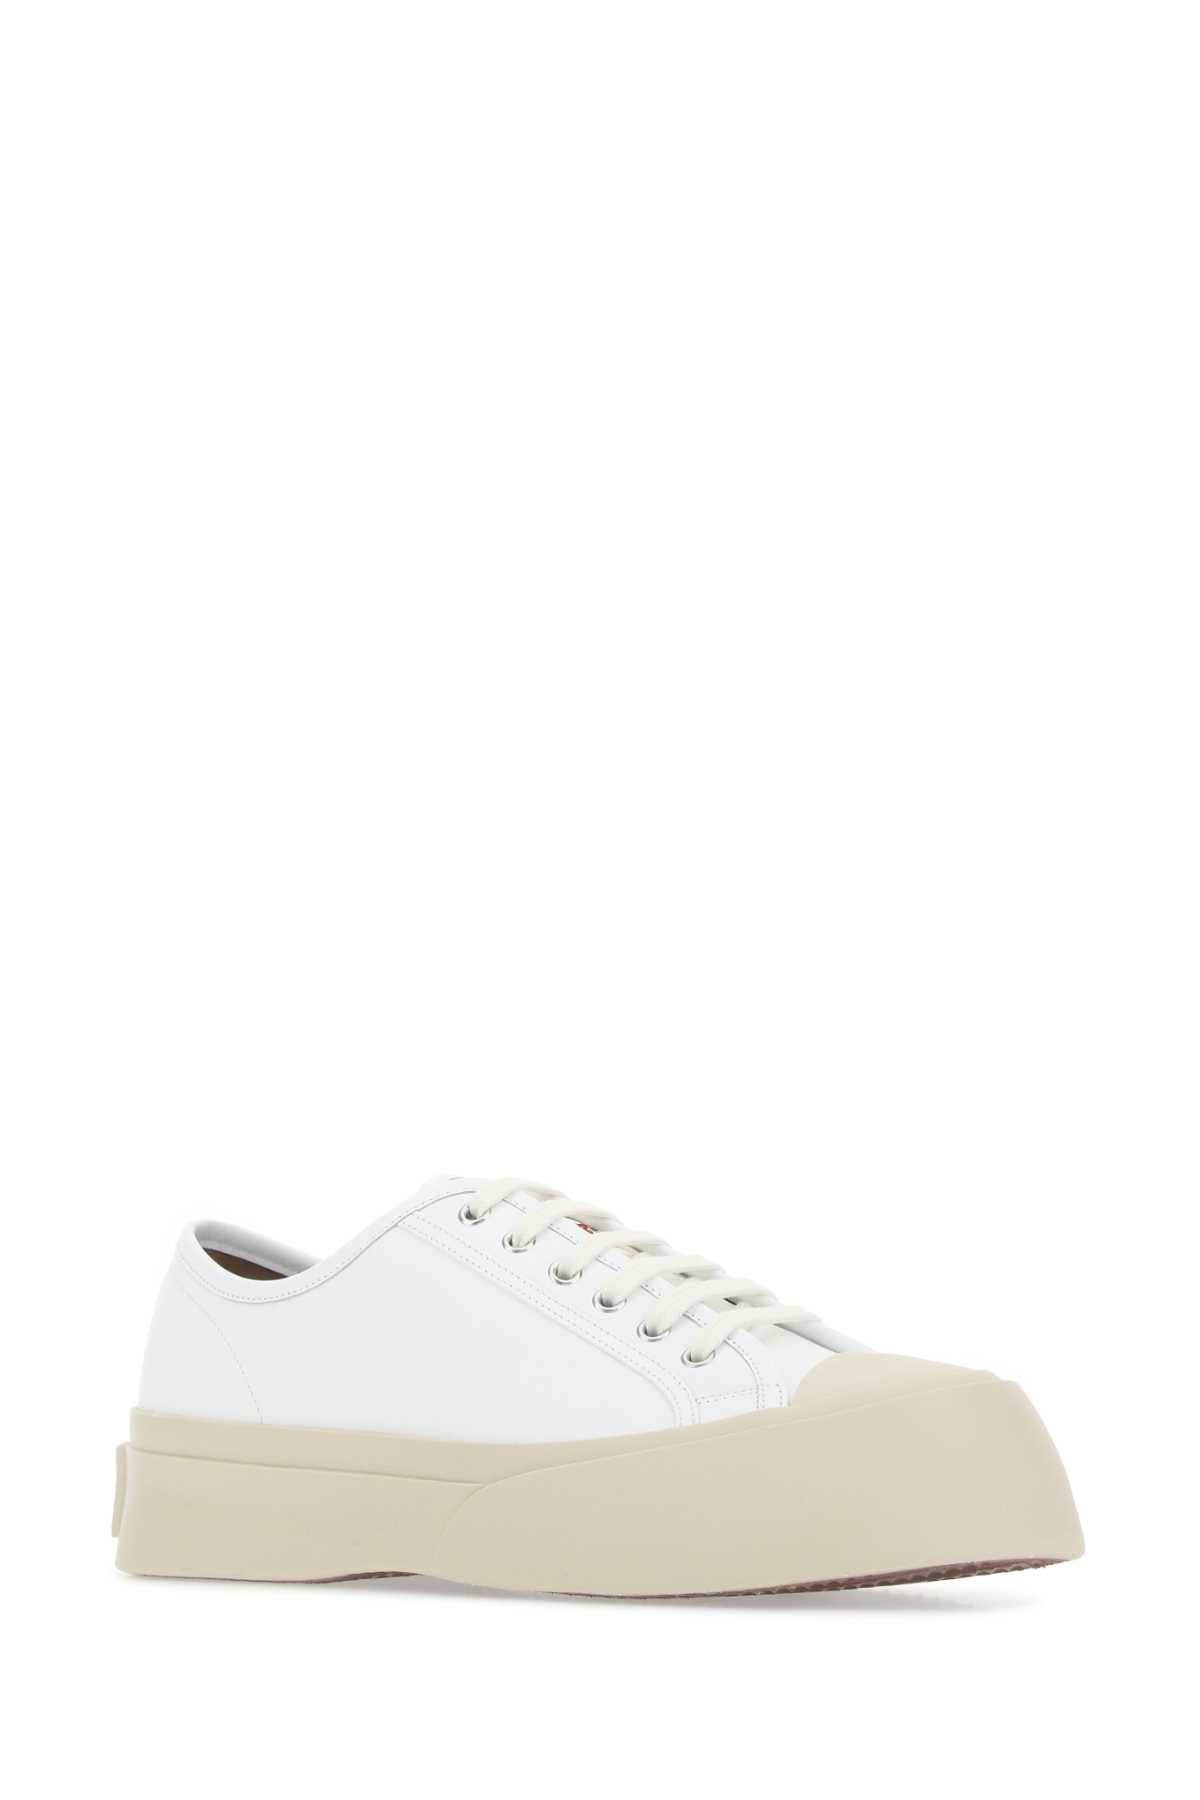 Marni White Leather Pablo Sneakers In 00w01